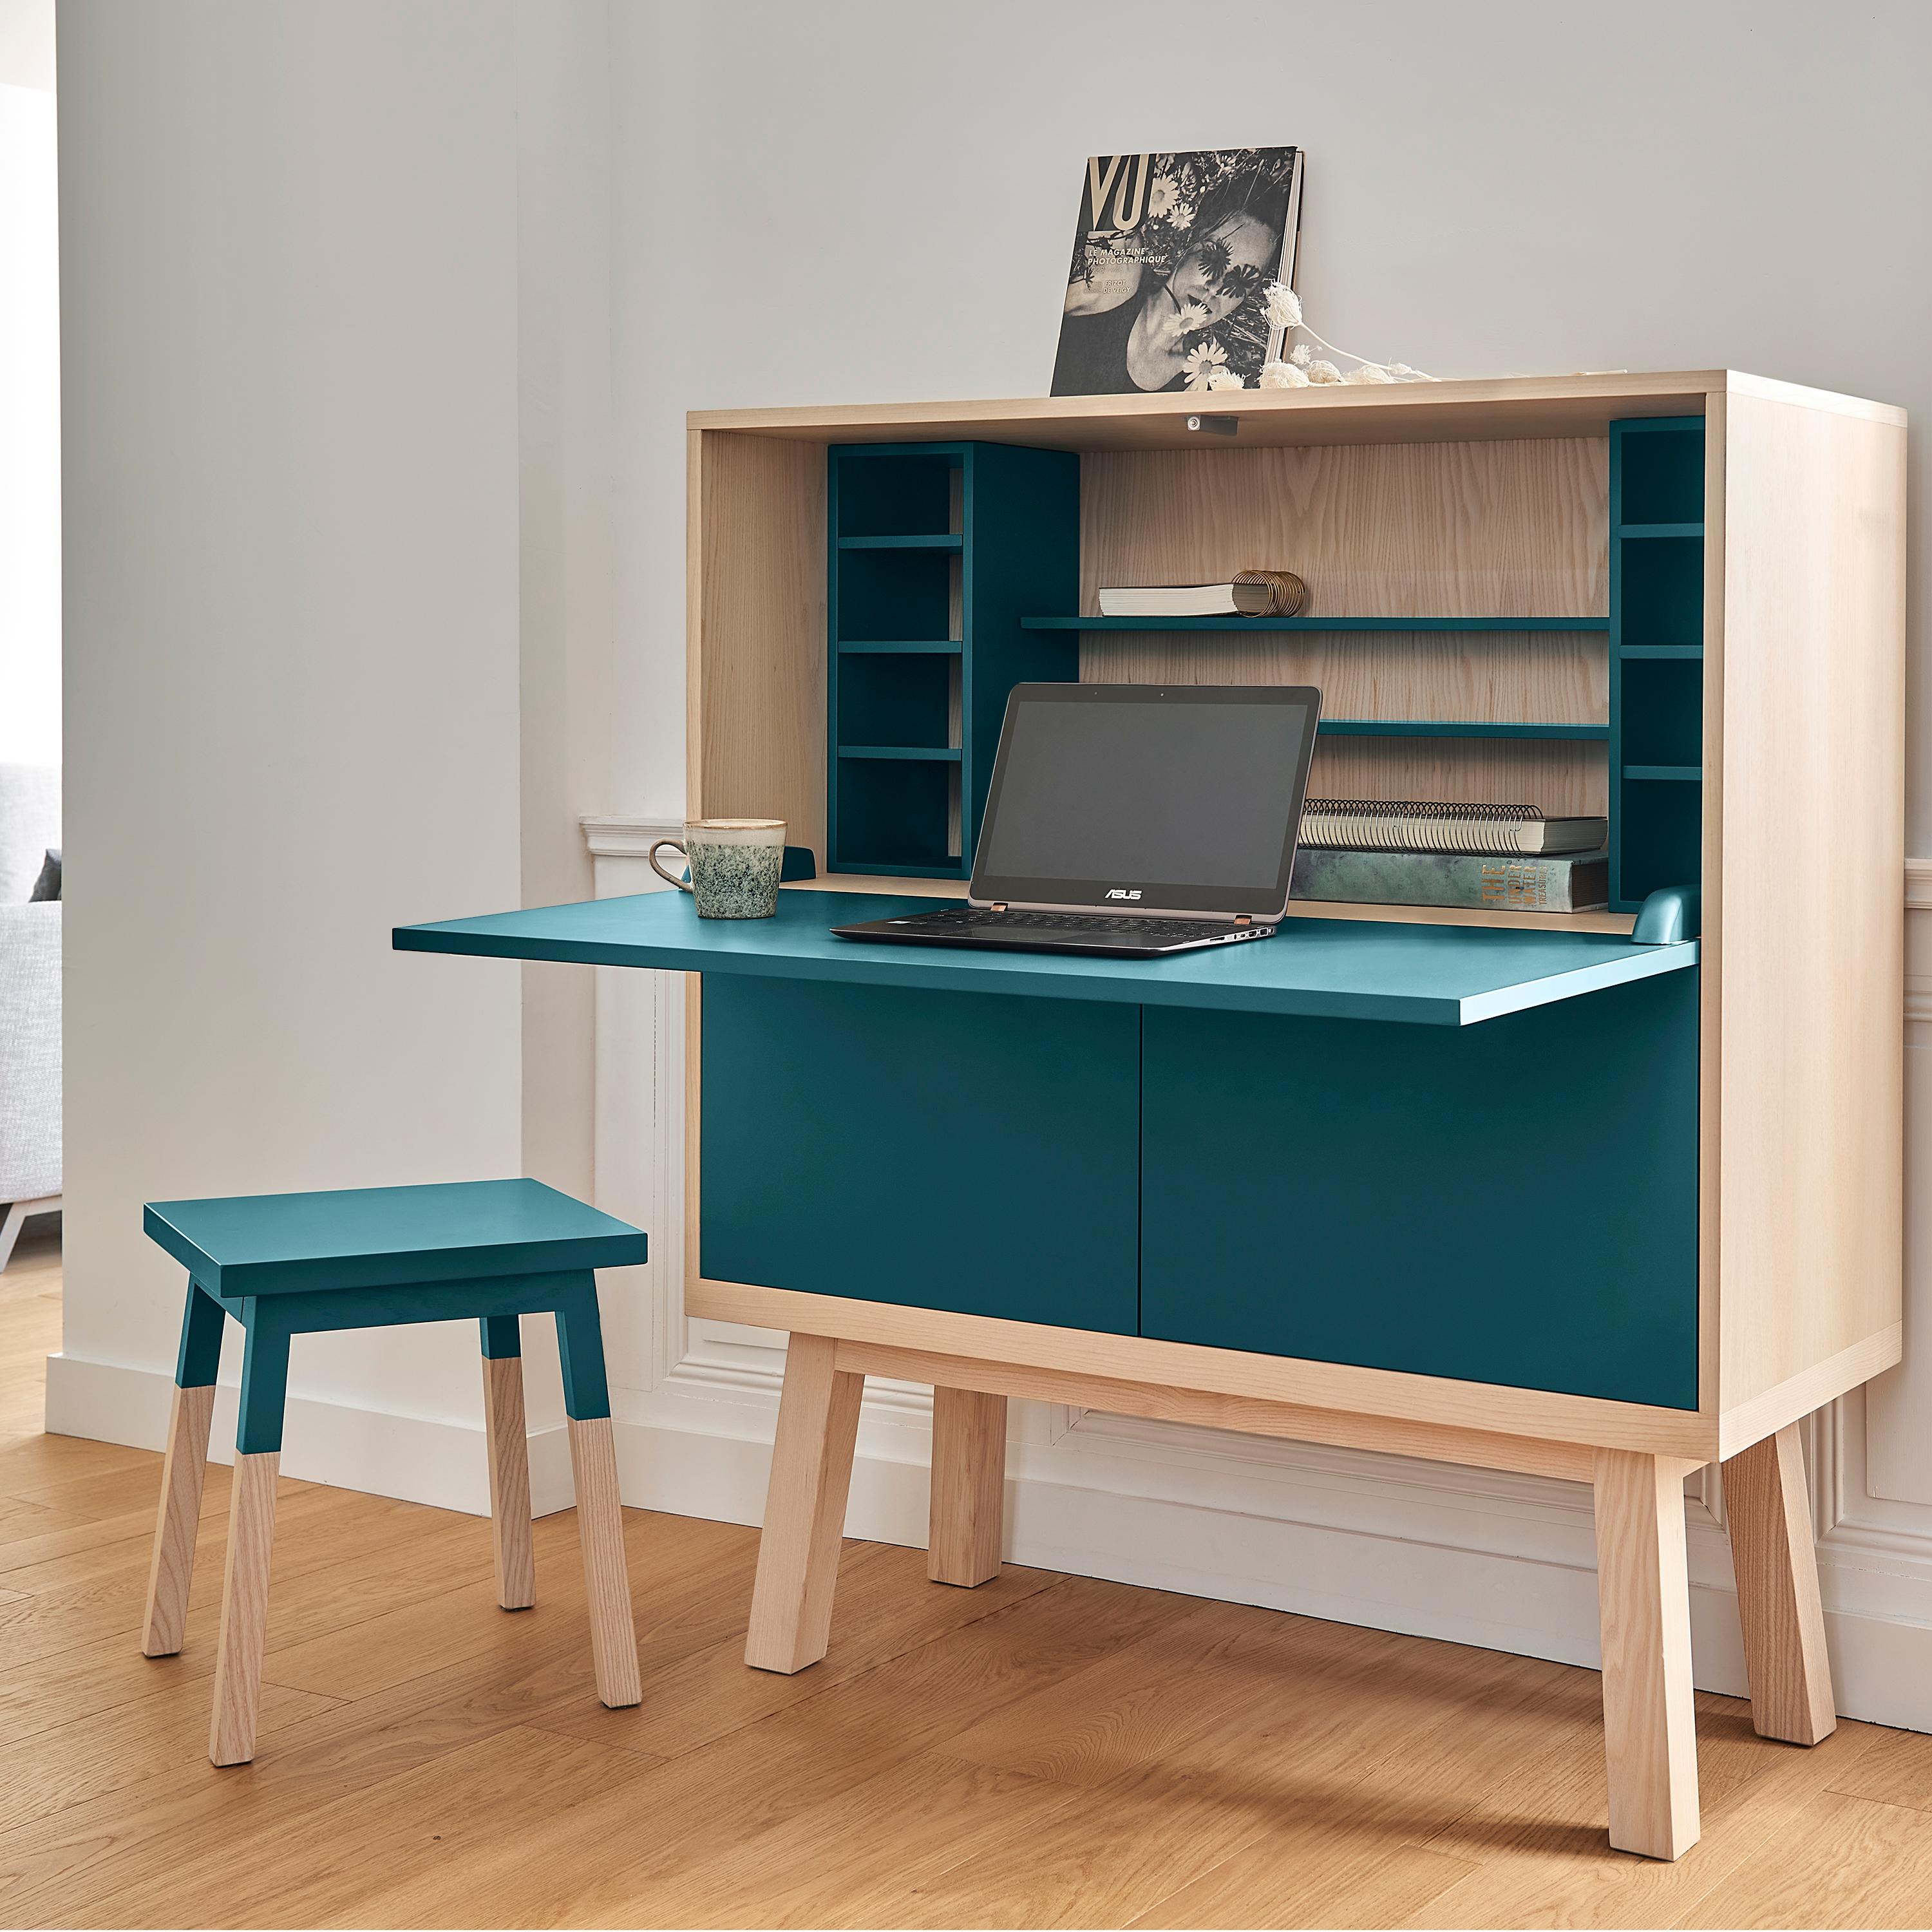 This large secretary desk is mounted in our French workshops and delivered fully assembled. 

The overall dimensions of the box itself are
Width 120 cm / 47.2''
Height 90 cm / 35.4'' 
Depth 46 cm / 18.11''

Height of the feet is 35 cm /